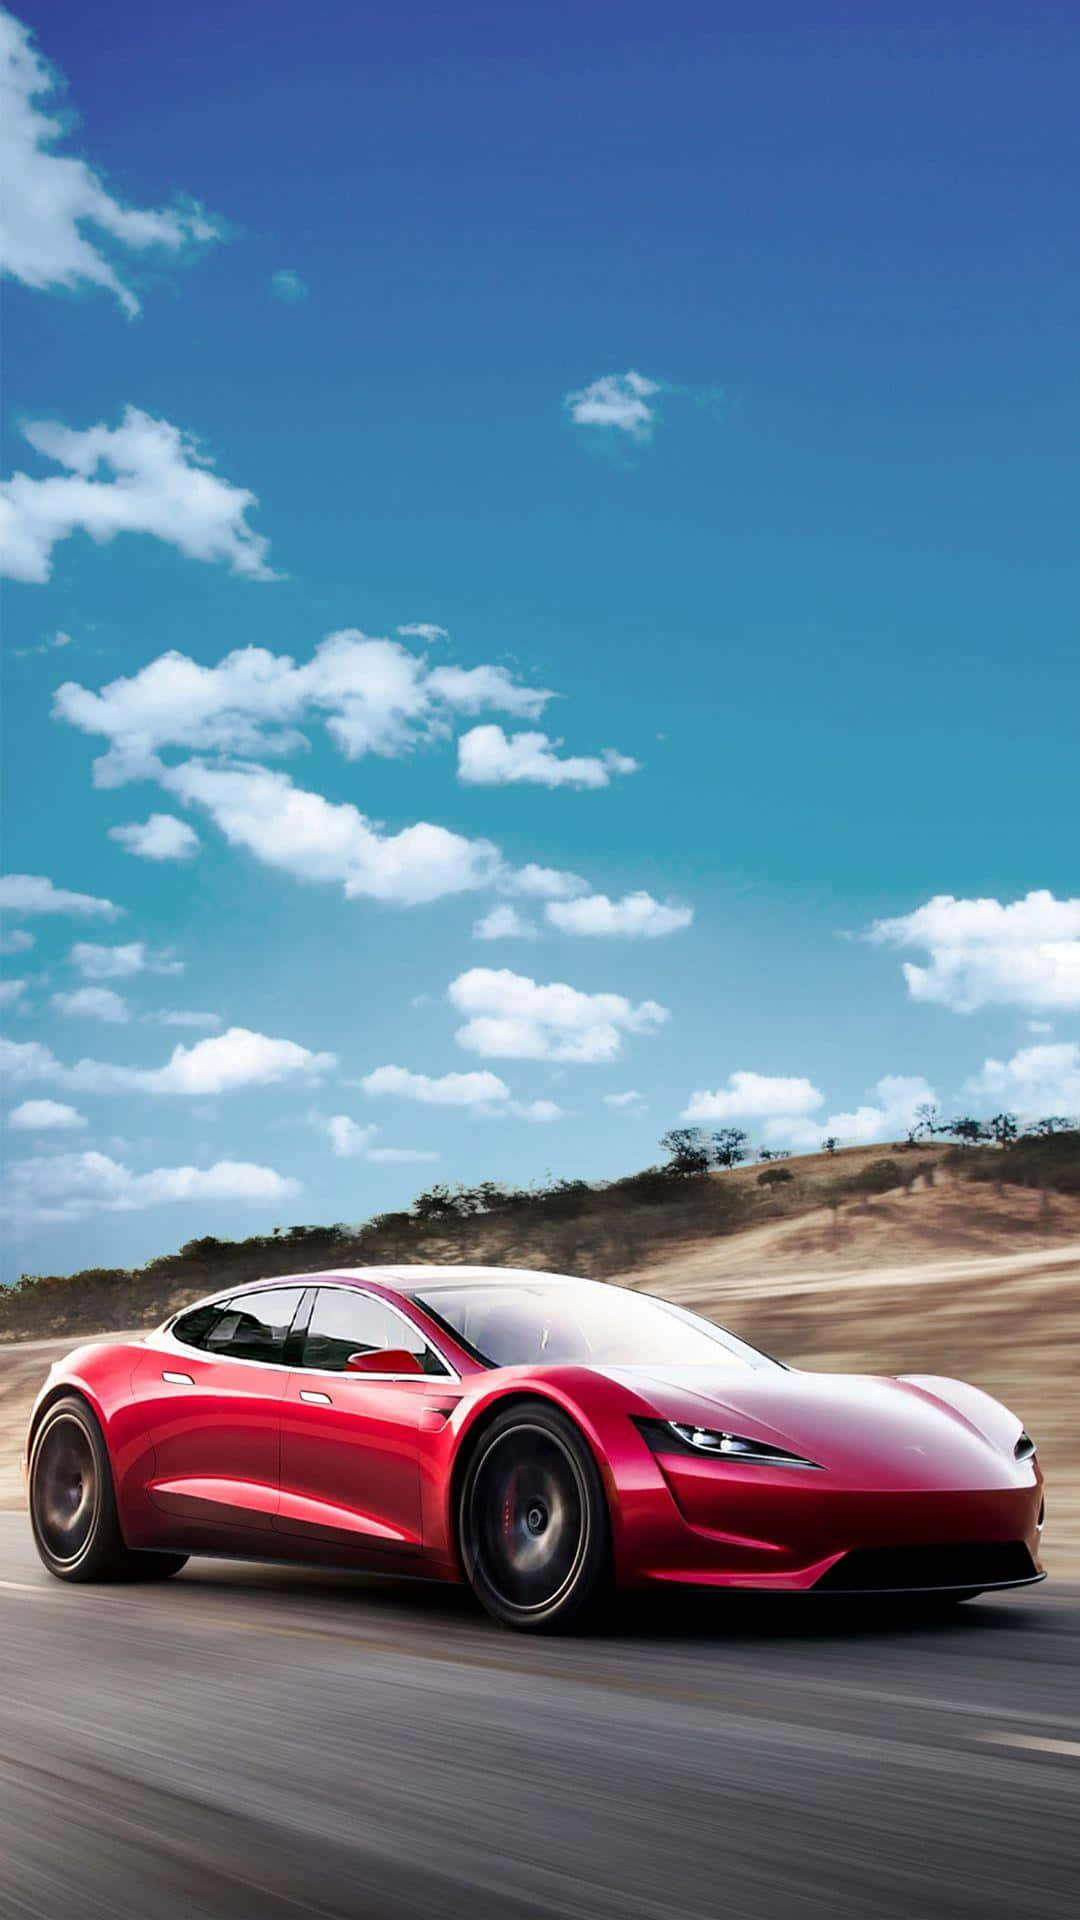 Get Technology on the Go with the Tesla Iphone Wallpaper